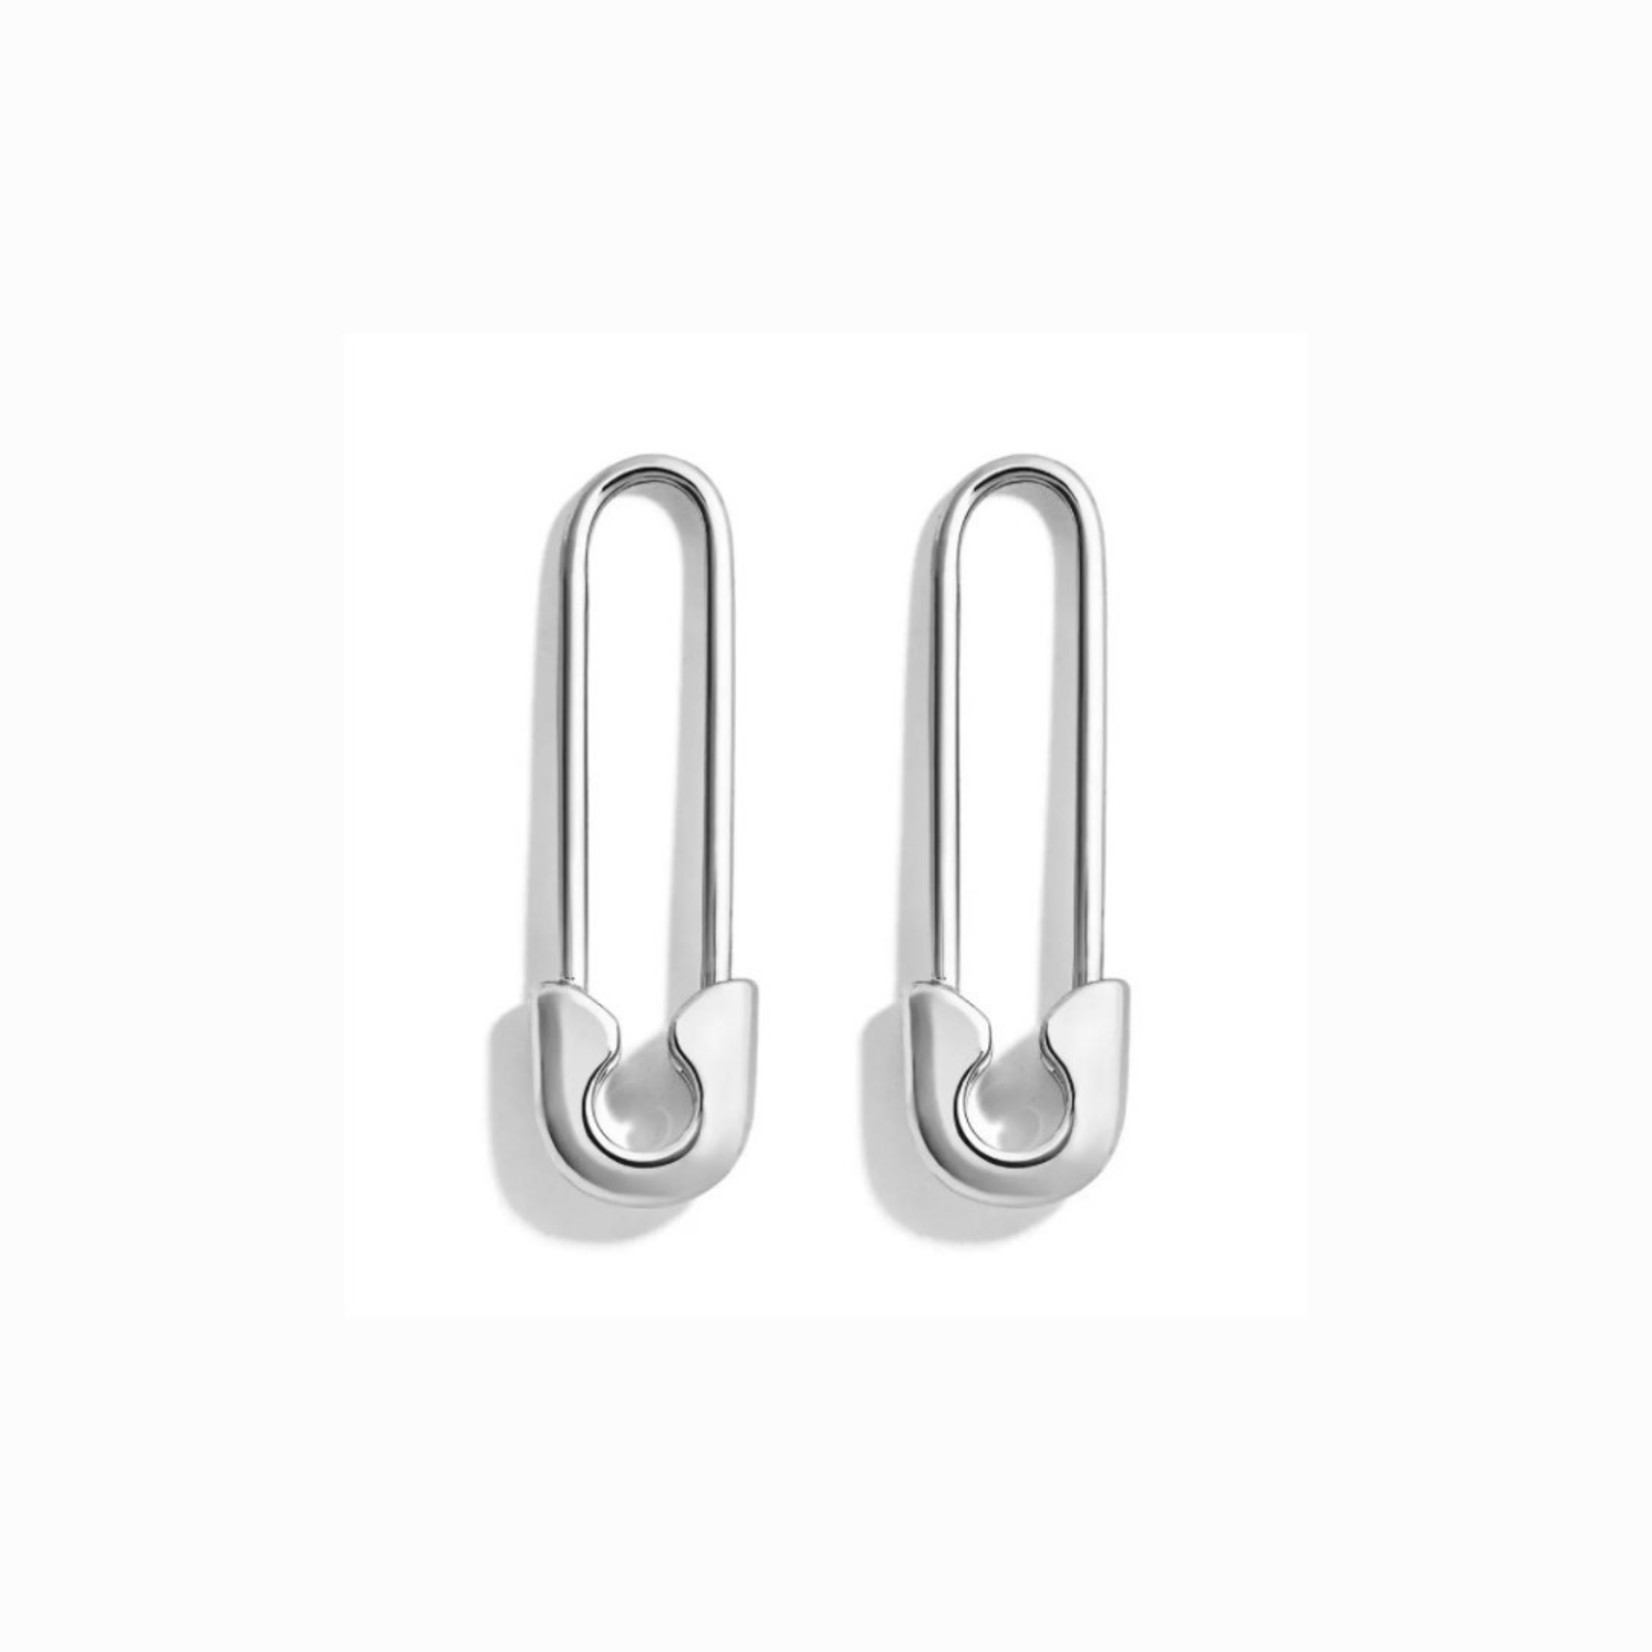 Fast Wholesale Safety Pin Earrings